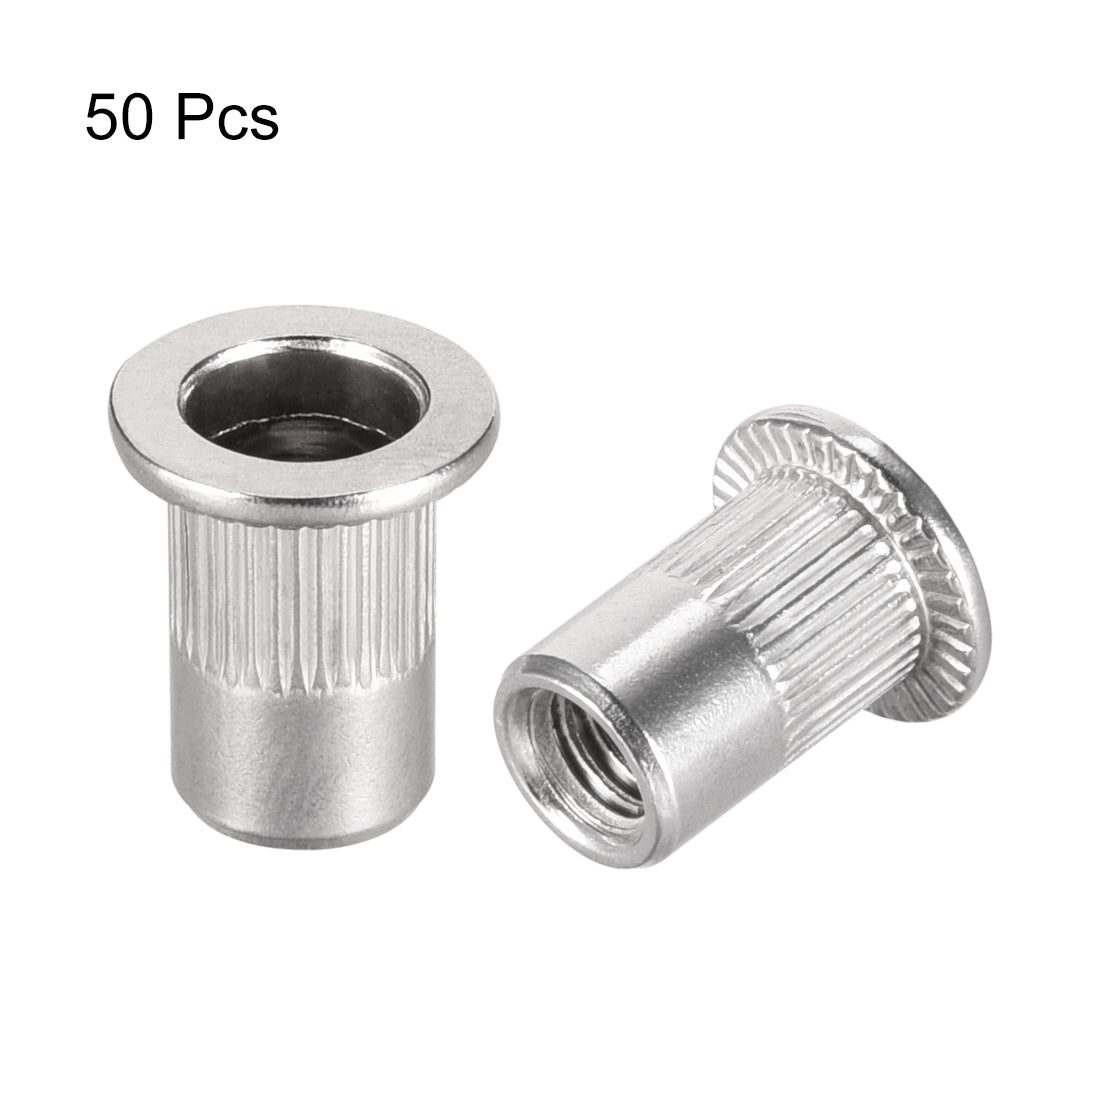 Uxcell Uxcell M5 304 Stainless Steel Rivet Nuts Flat Head Insert  20 Pcs